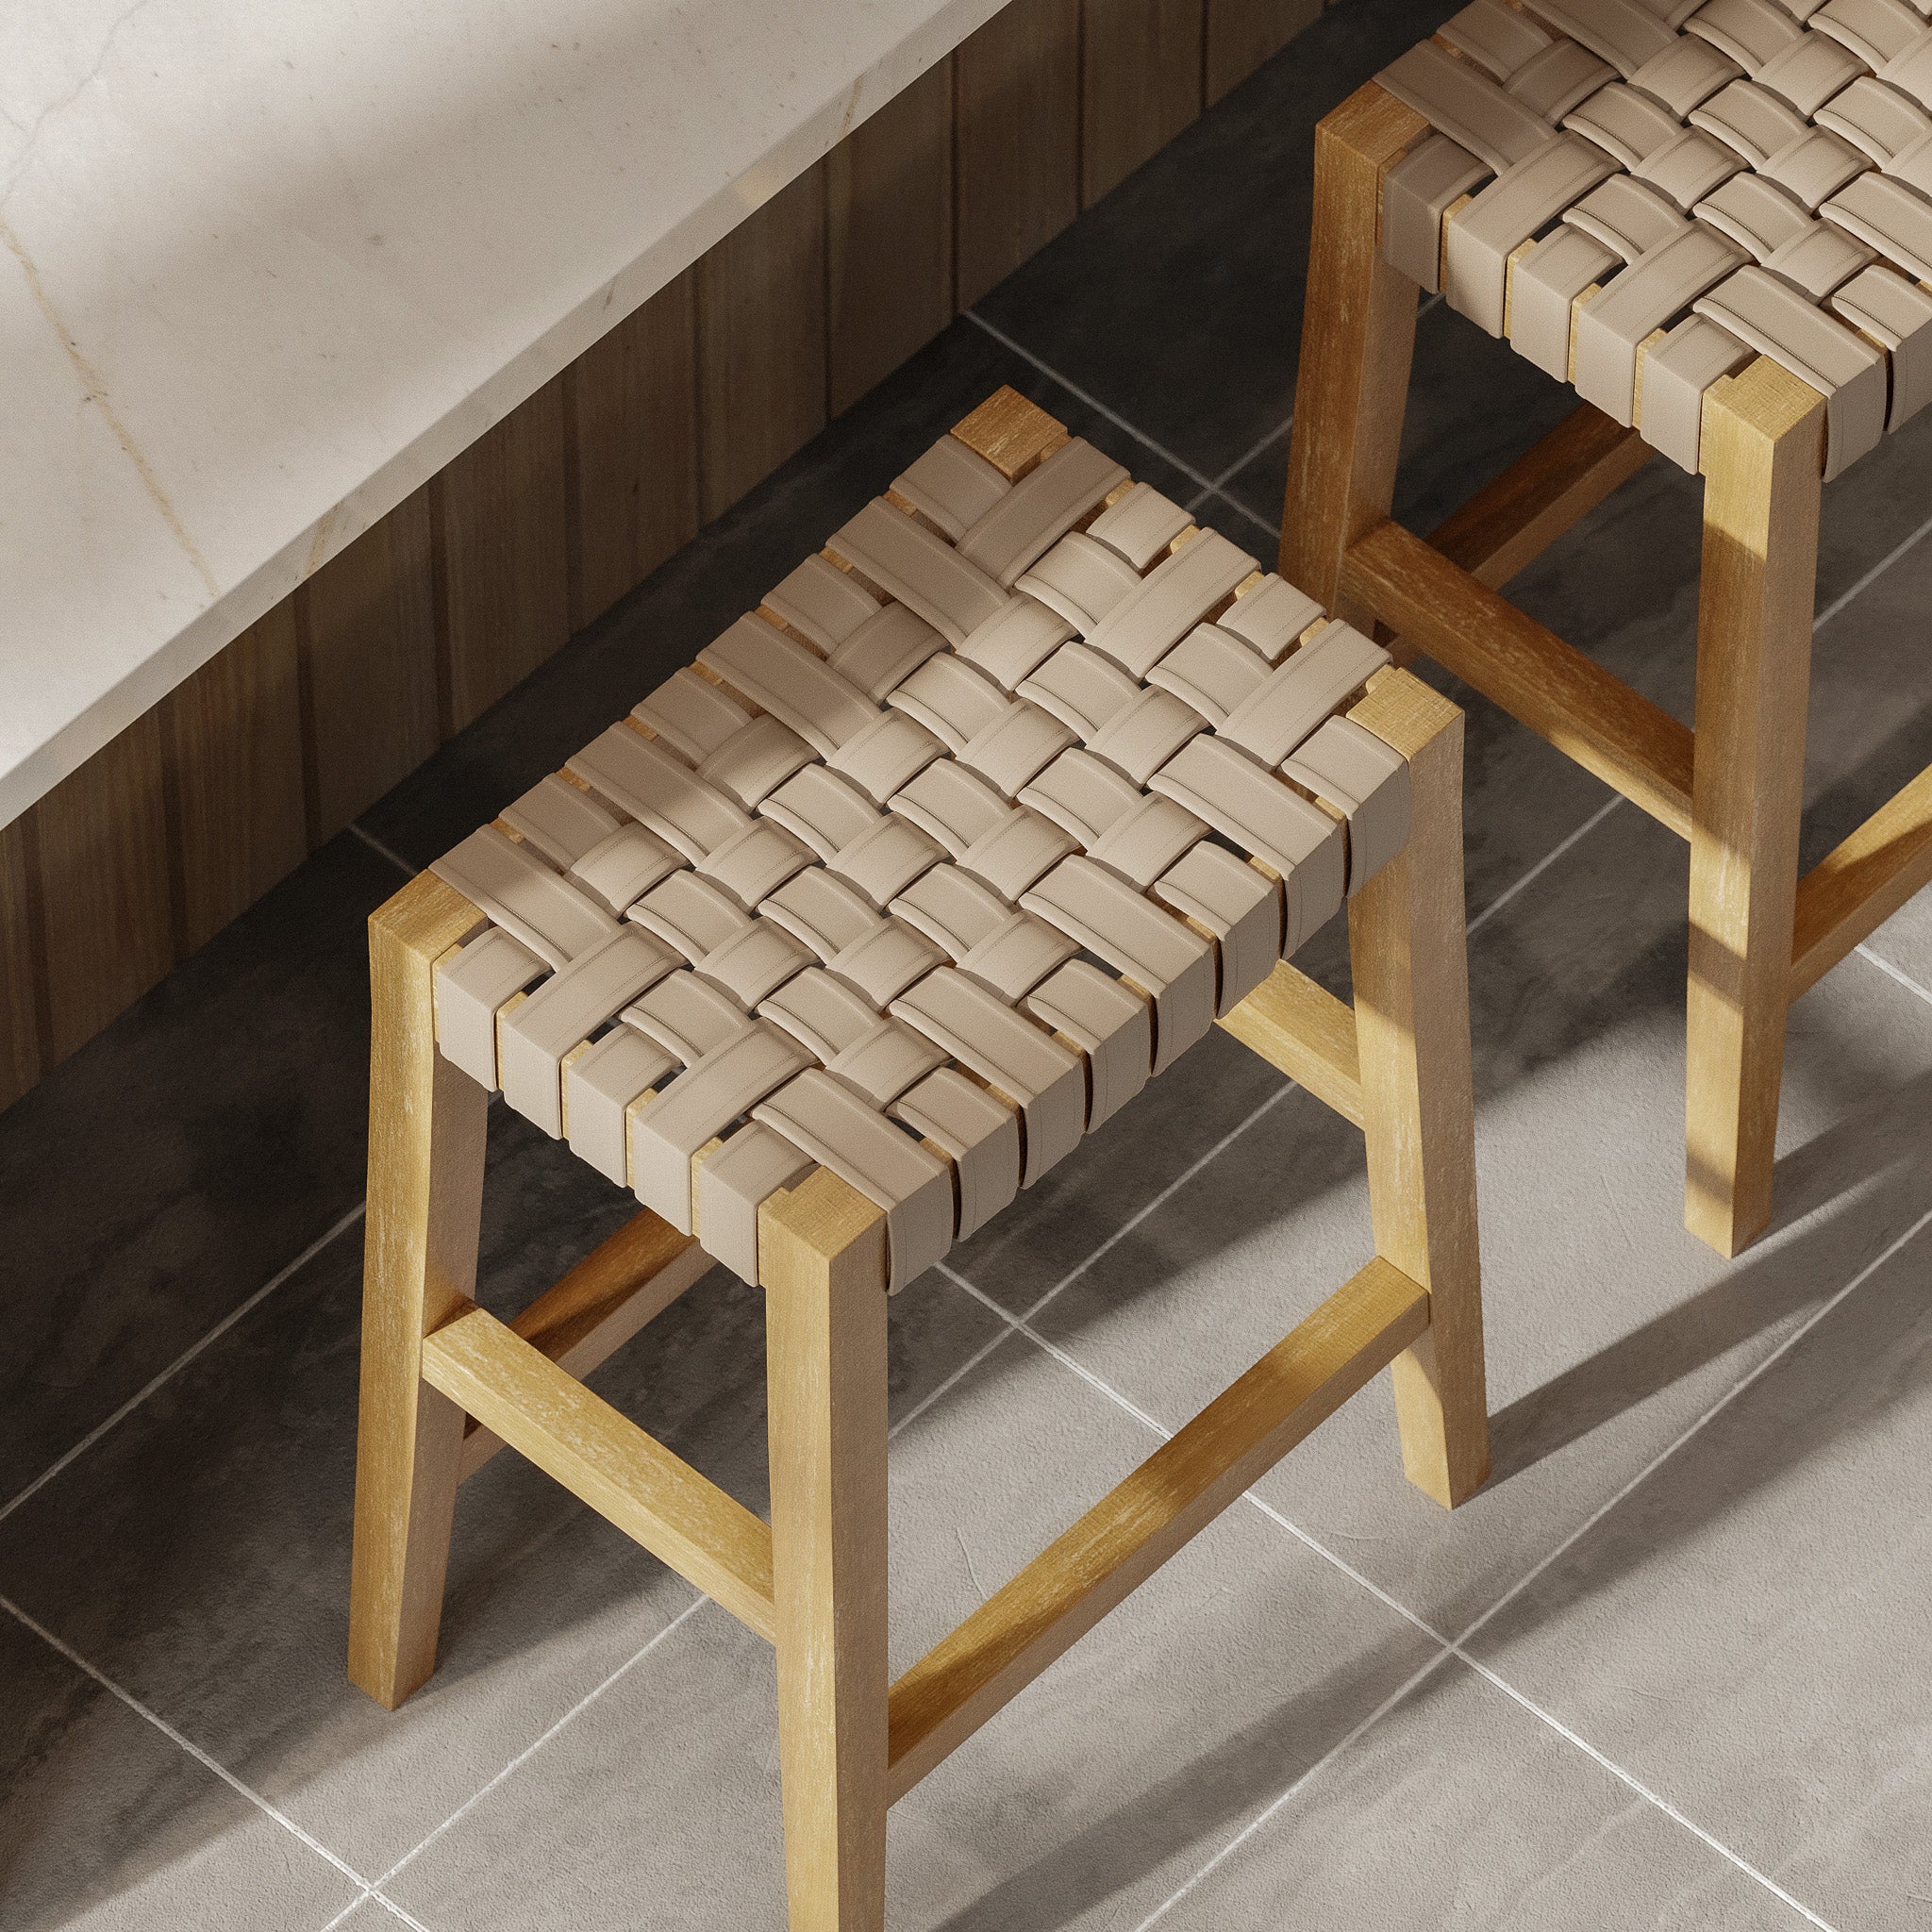 Emerson Counter Stool in Weathered Natural Wood Finish with Avanti Bone Vegan Leather in Stools by Maven Lane